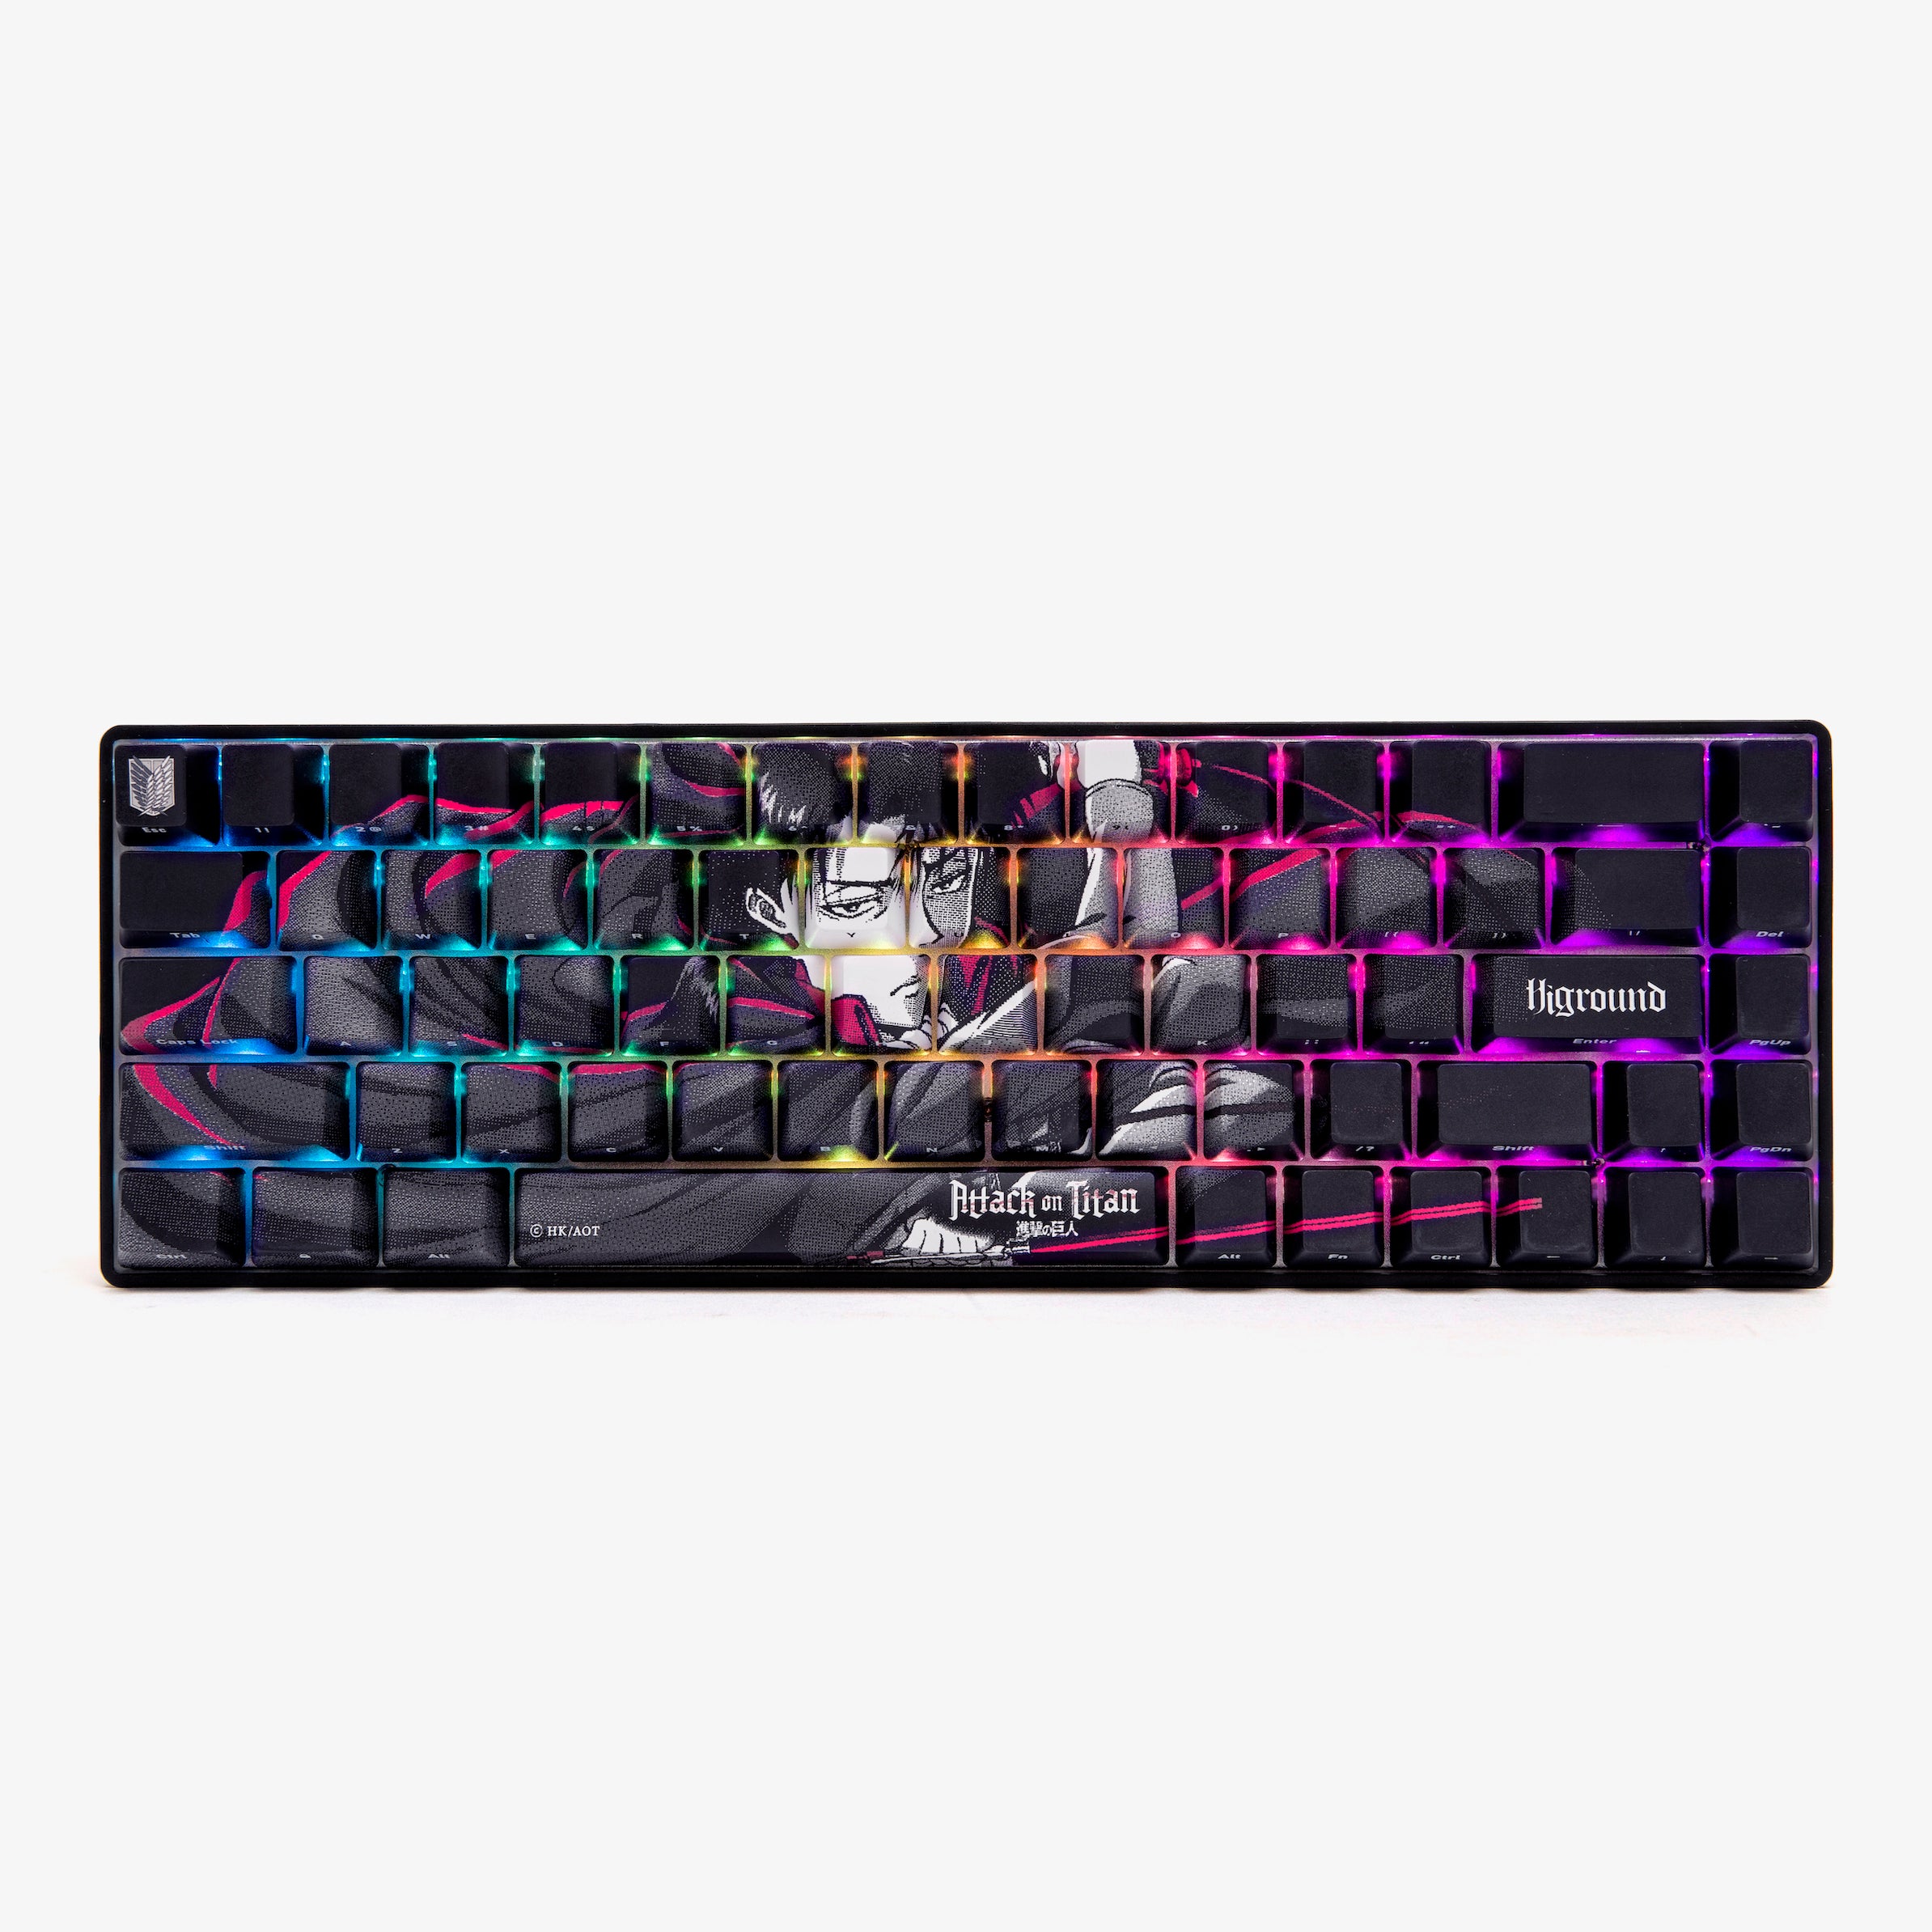 All Keyboards - Higround Premium Mechanical Keyboards – Page 2